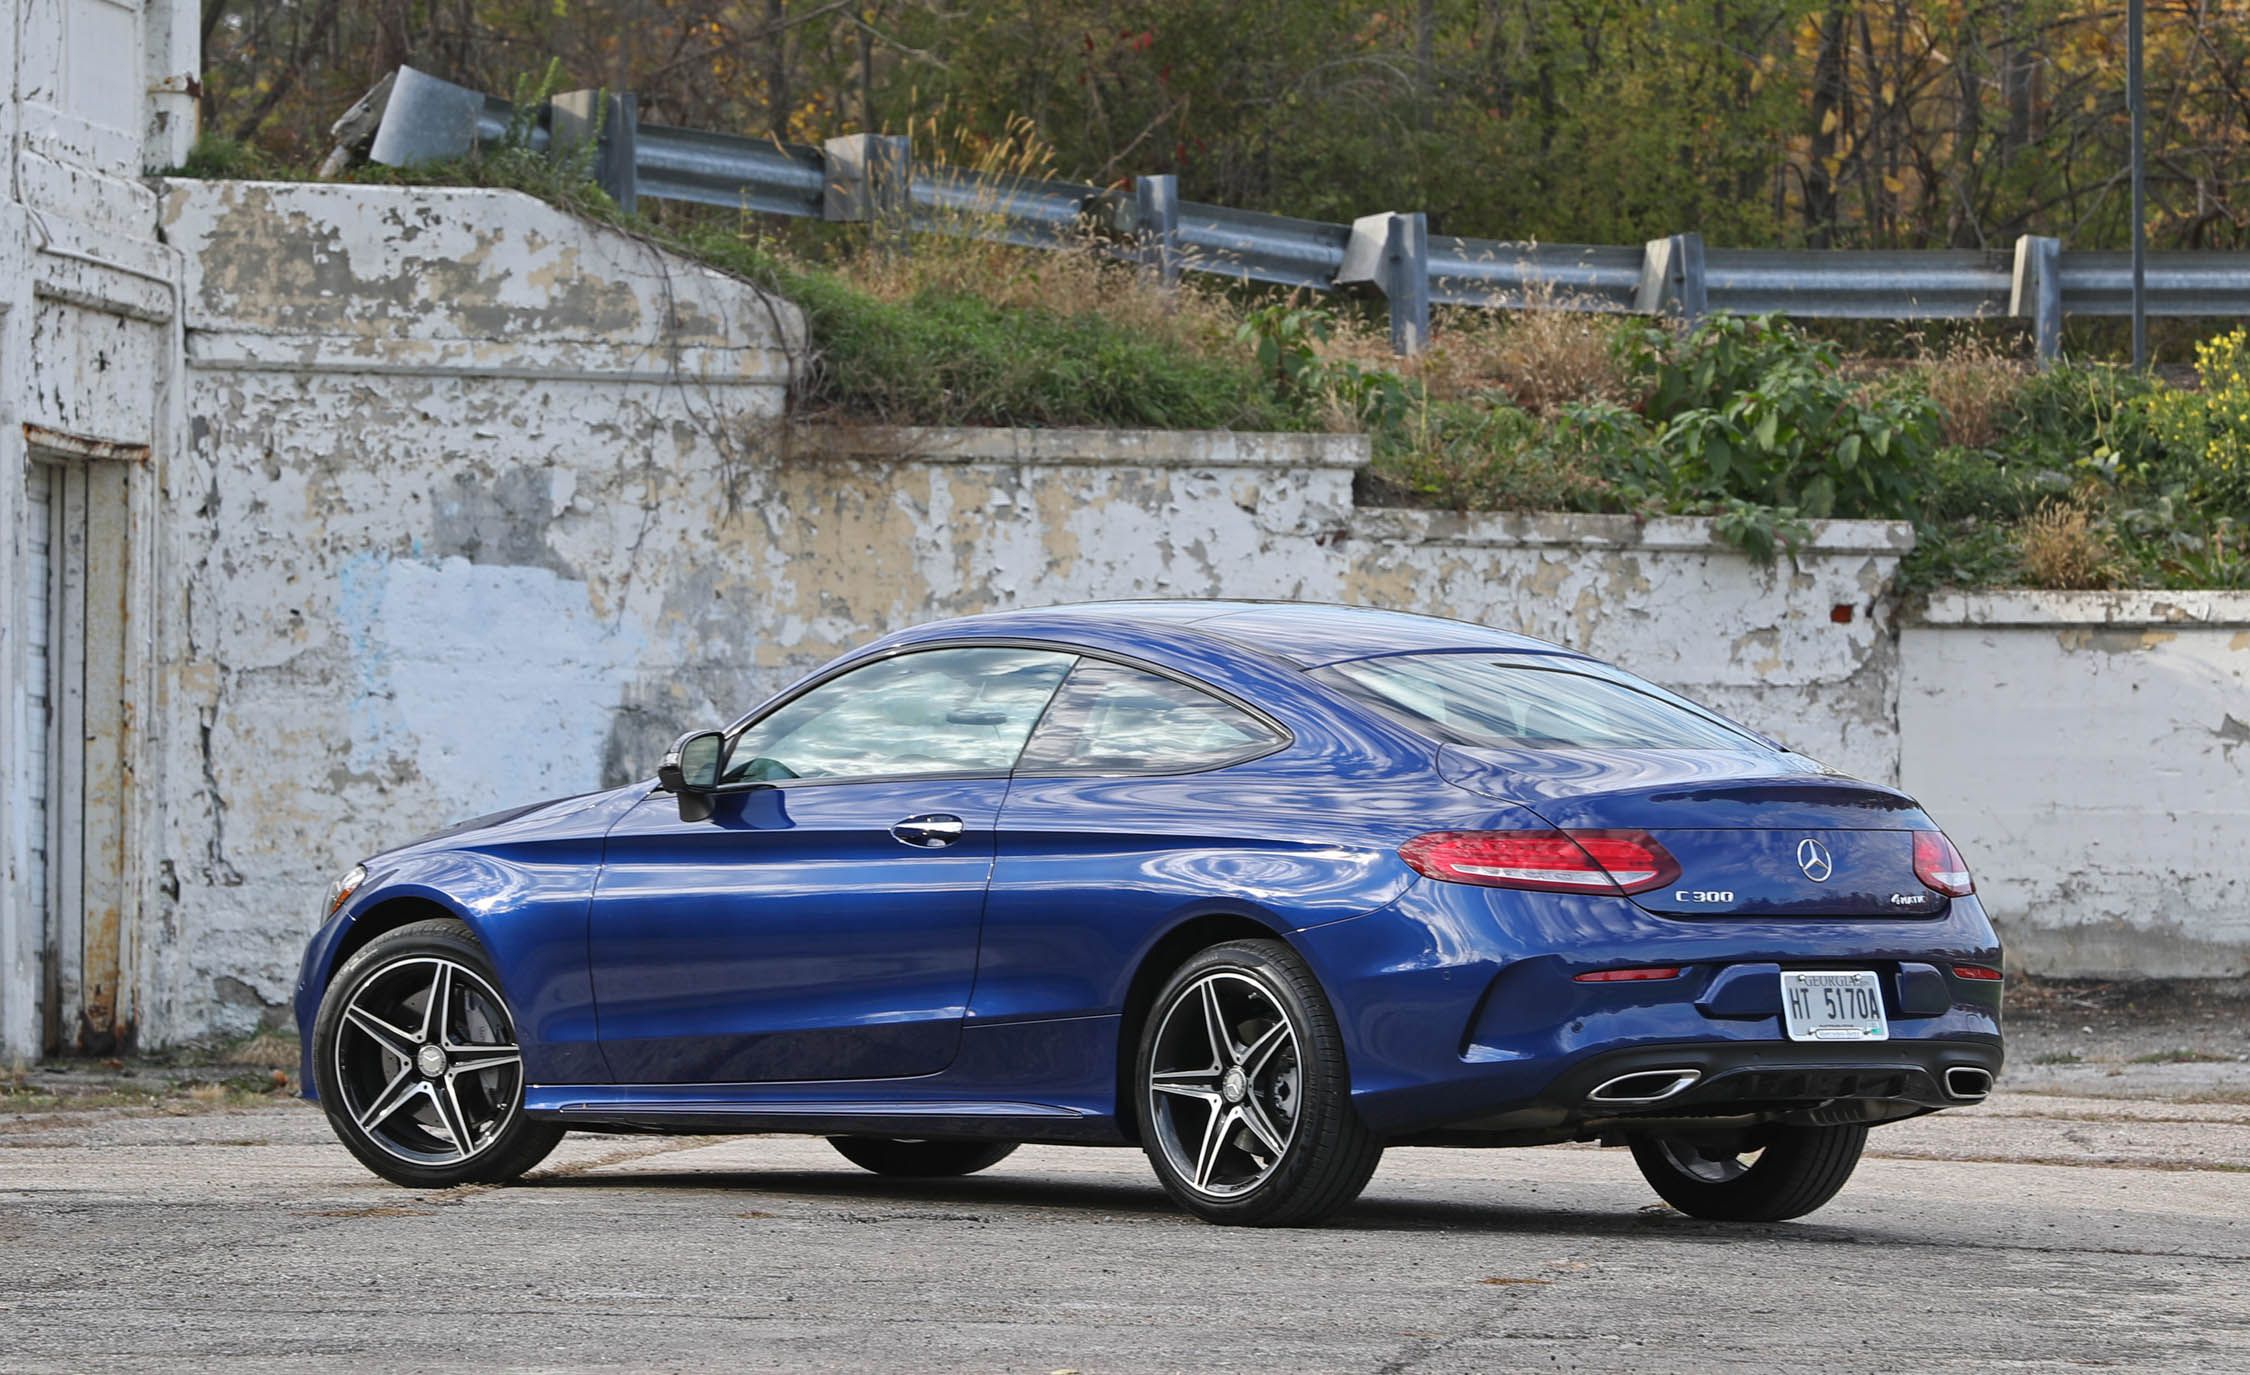 2017 Mercedes Benz C300 4MATIC Coupe Exterior Side And Rear (View 36 of 44)